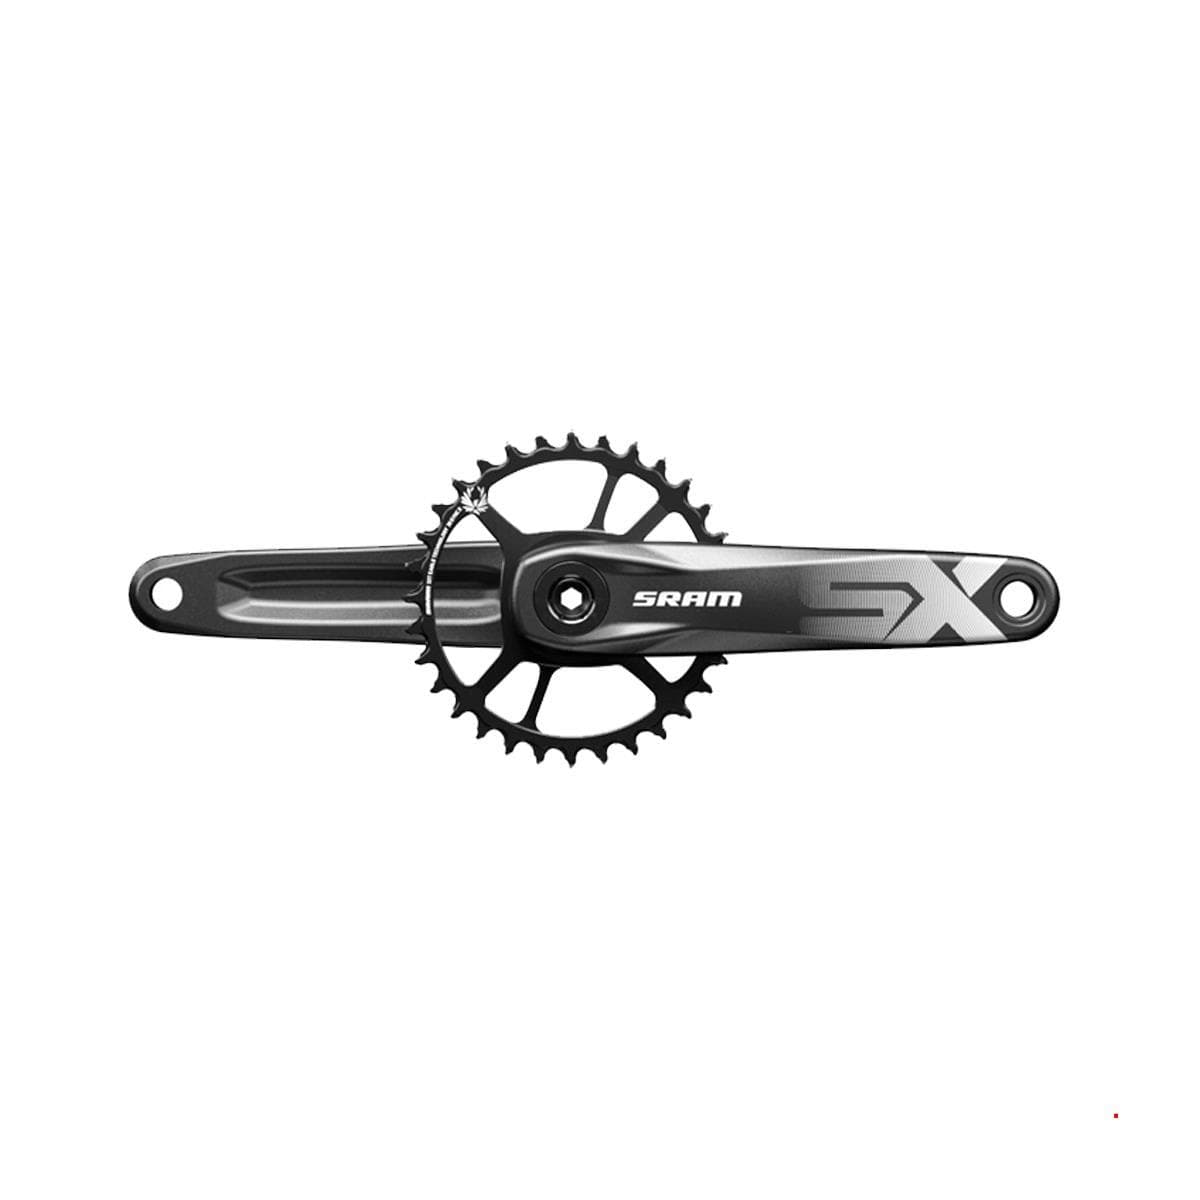 Sram Crankset Sx Eagle Dub 12S With Direct Mount 32T X-Sync 2 Steel Chainring A1: Black 165Mm